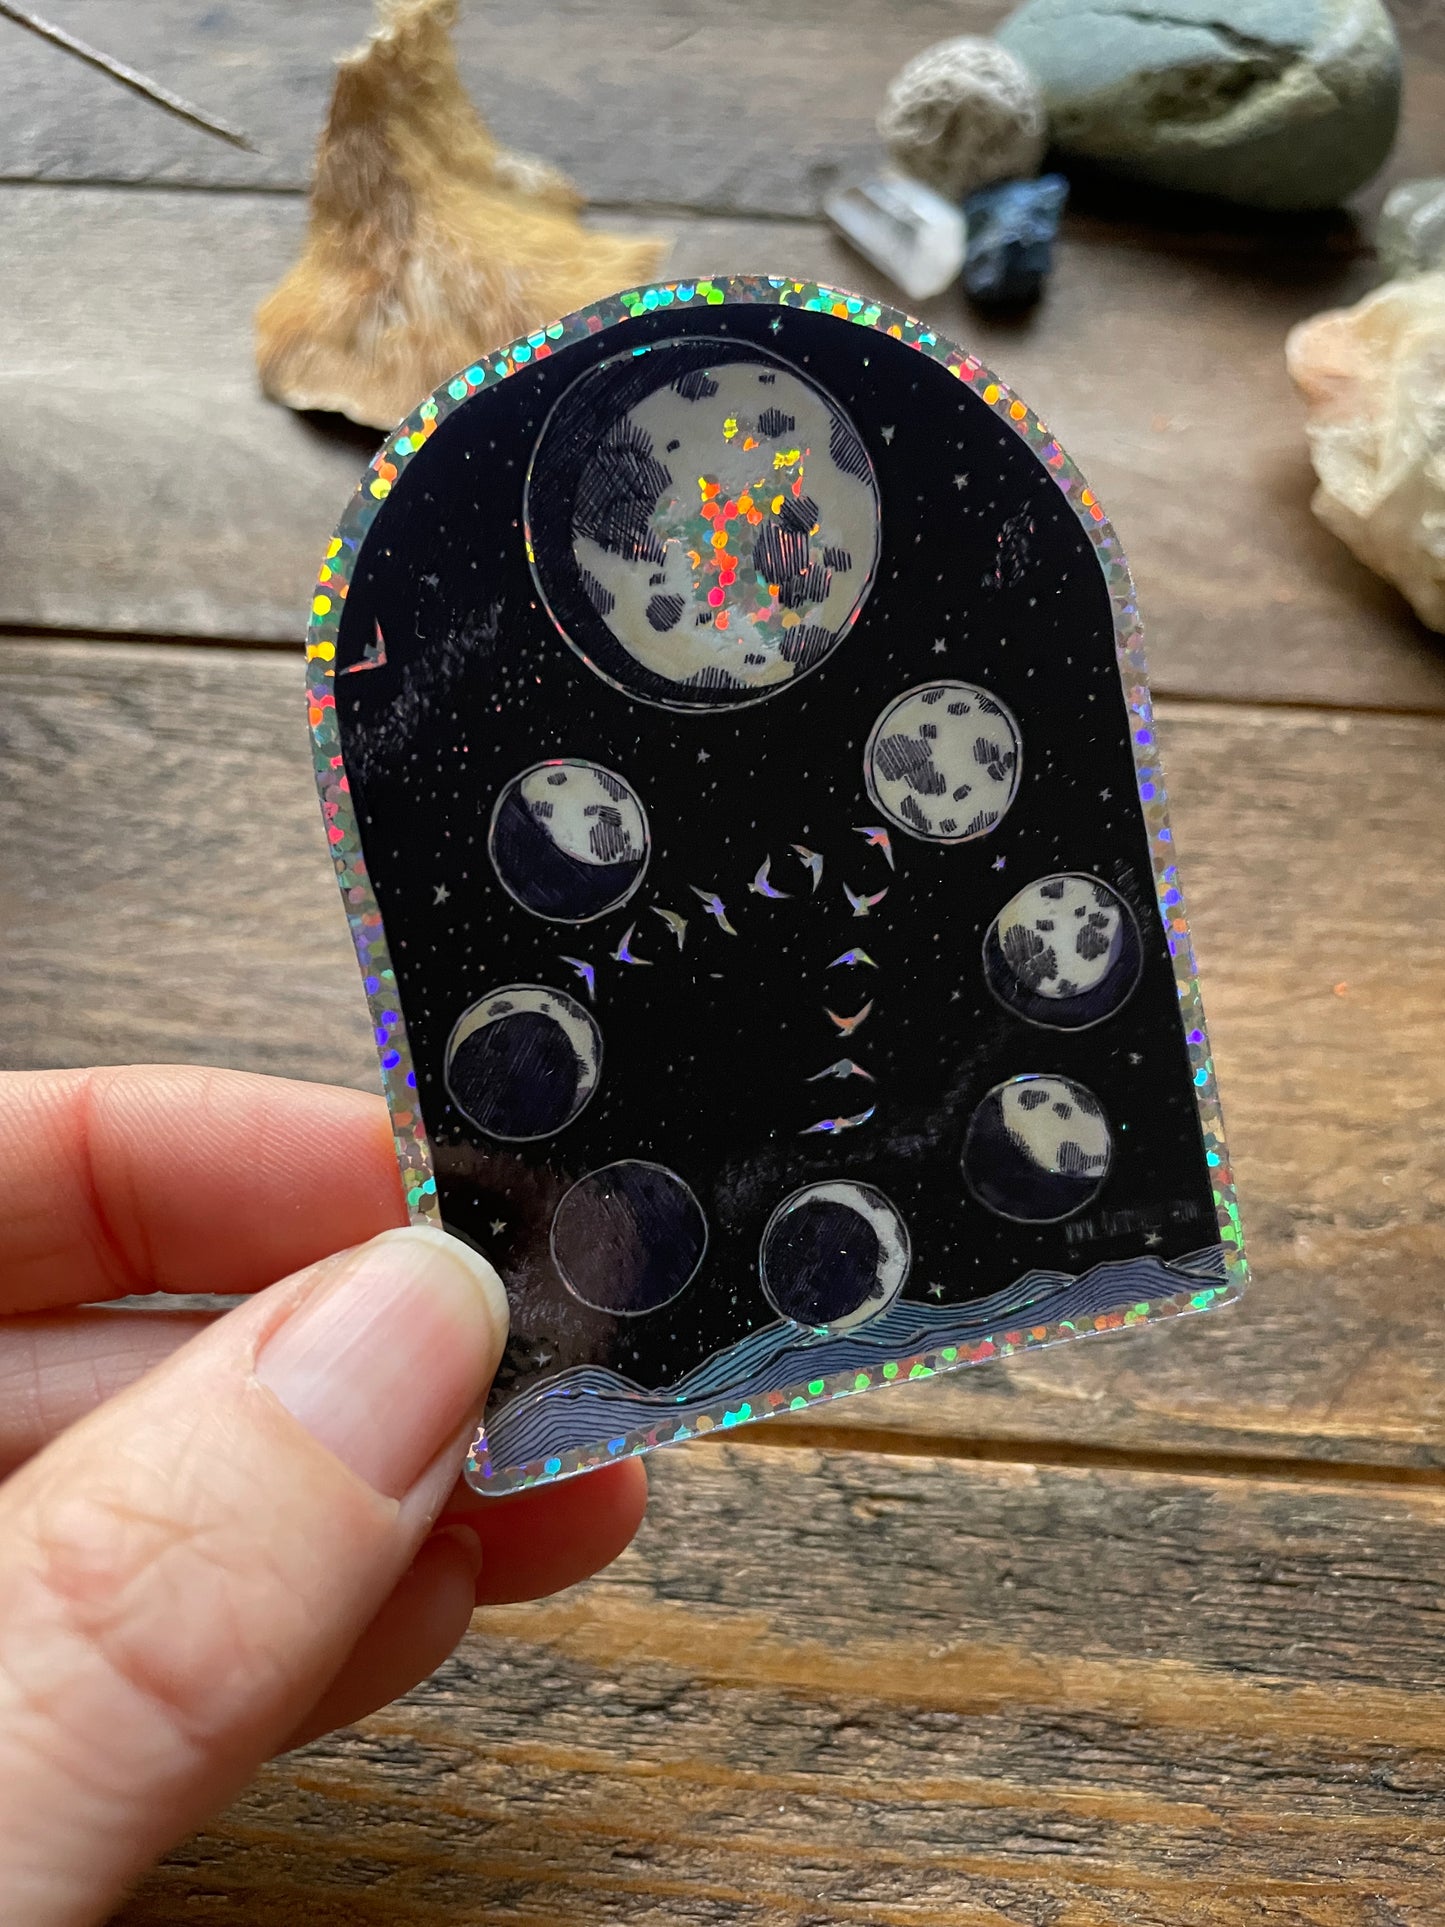 Moon Phase 3" Vinyl Sticker Phases and Forests